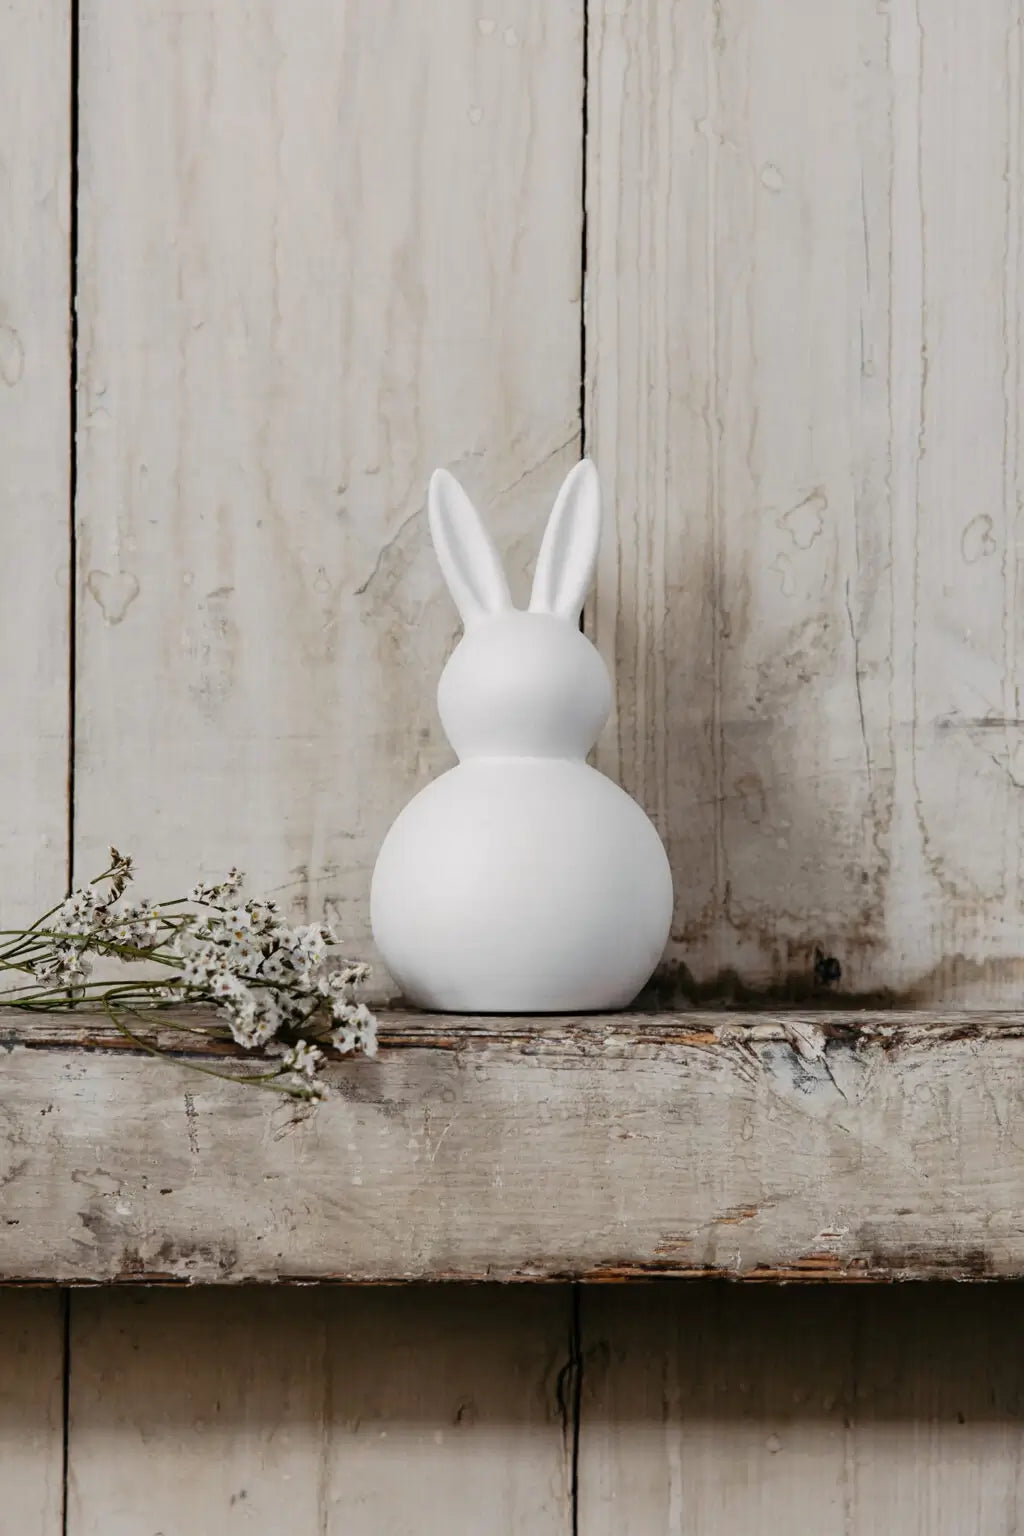 Small Bunny - Tore | White | Ceramic | by Storefactory - Lifestory